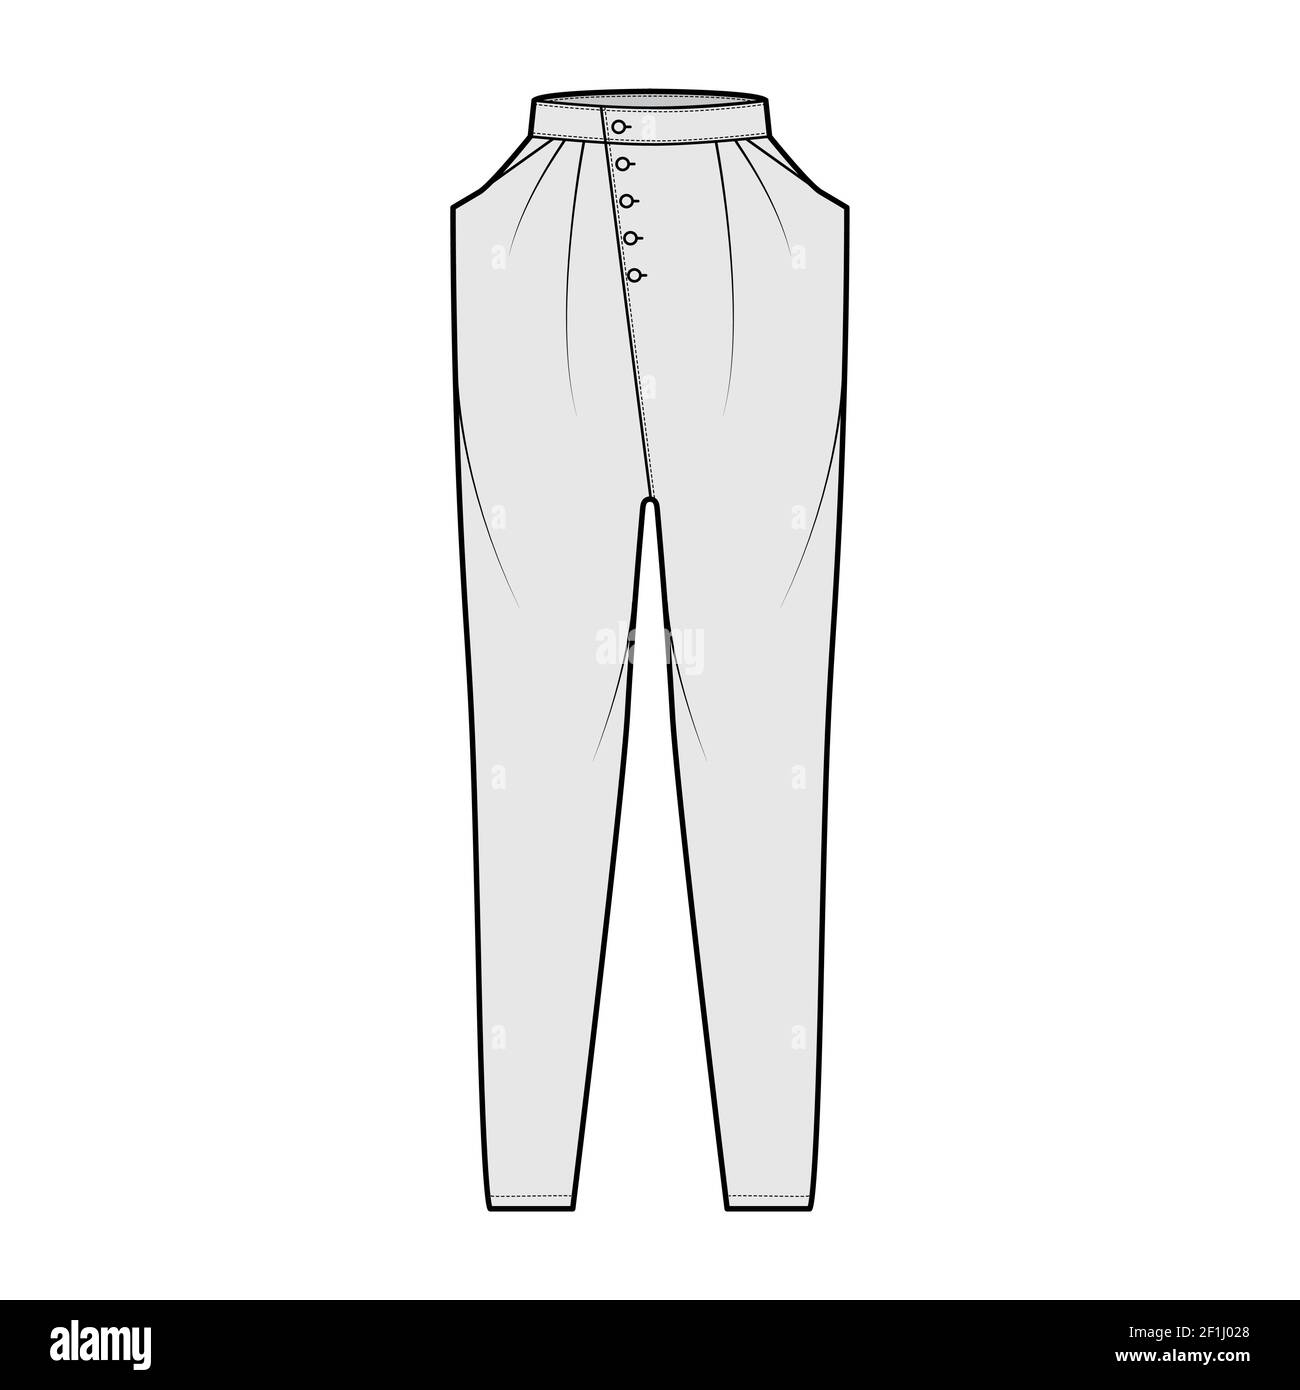 Tapered Baggy pants technical fashion illustration with normal waist, high  rise, slash pockets, draping front, full lengths. Flat bottom apparel  template grey color style. Women, men unisex CAD mockup Stock Vector Image